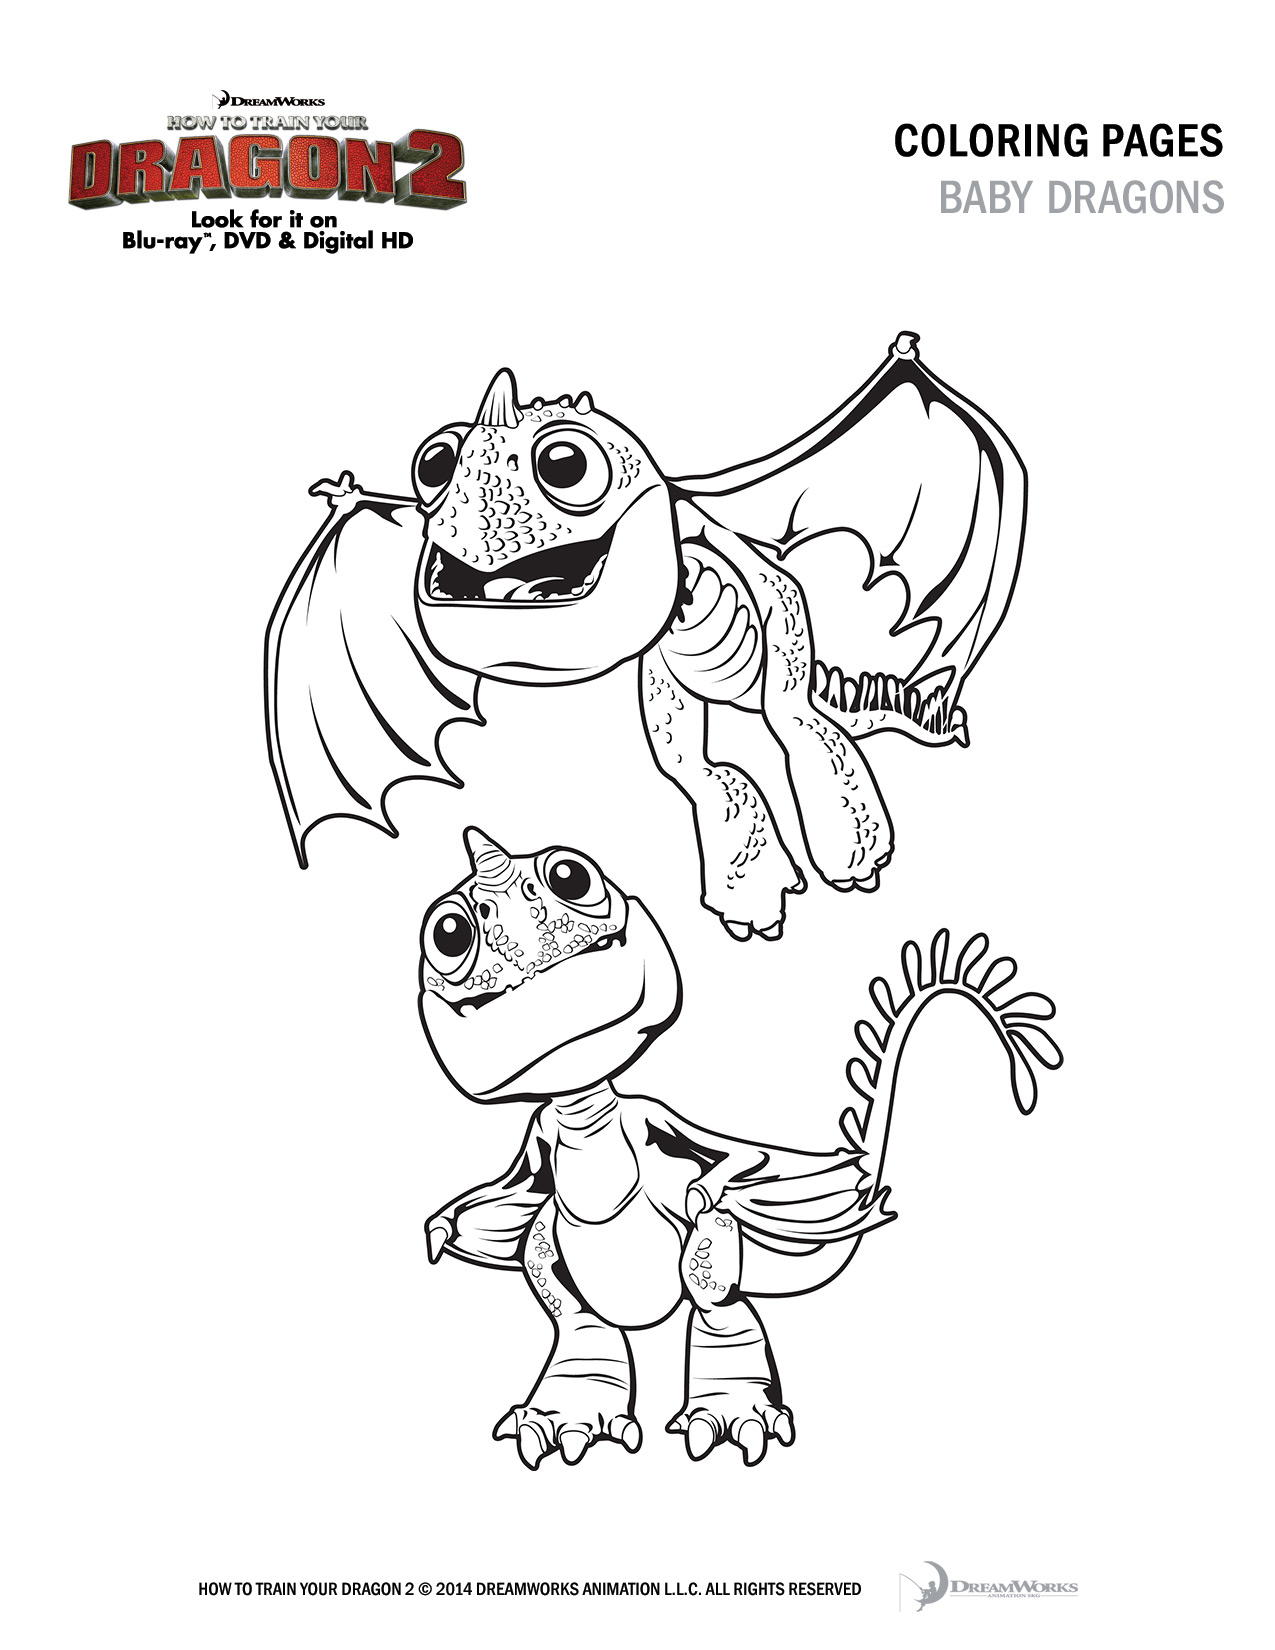 How to Train Your Dragon 2 Free Coloring and Activity Pages 